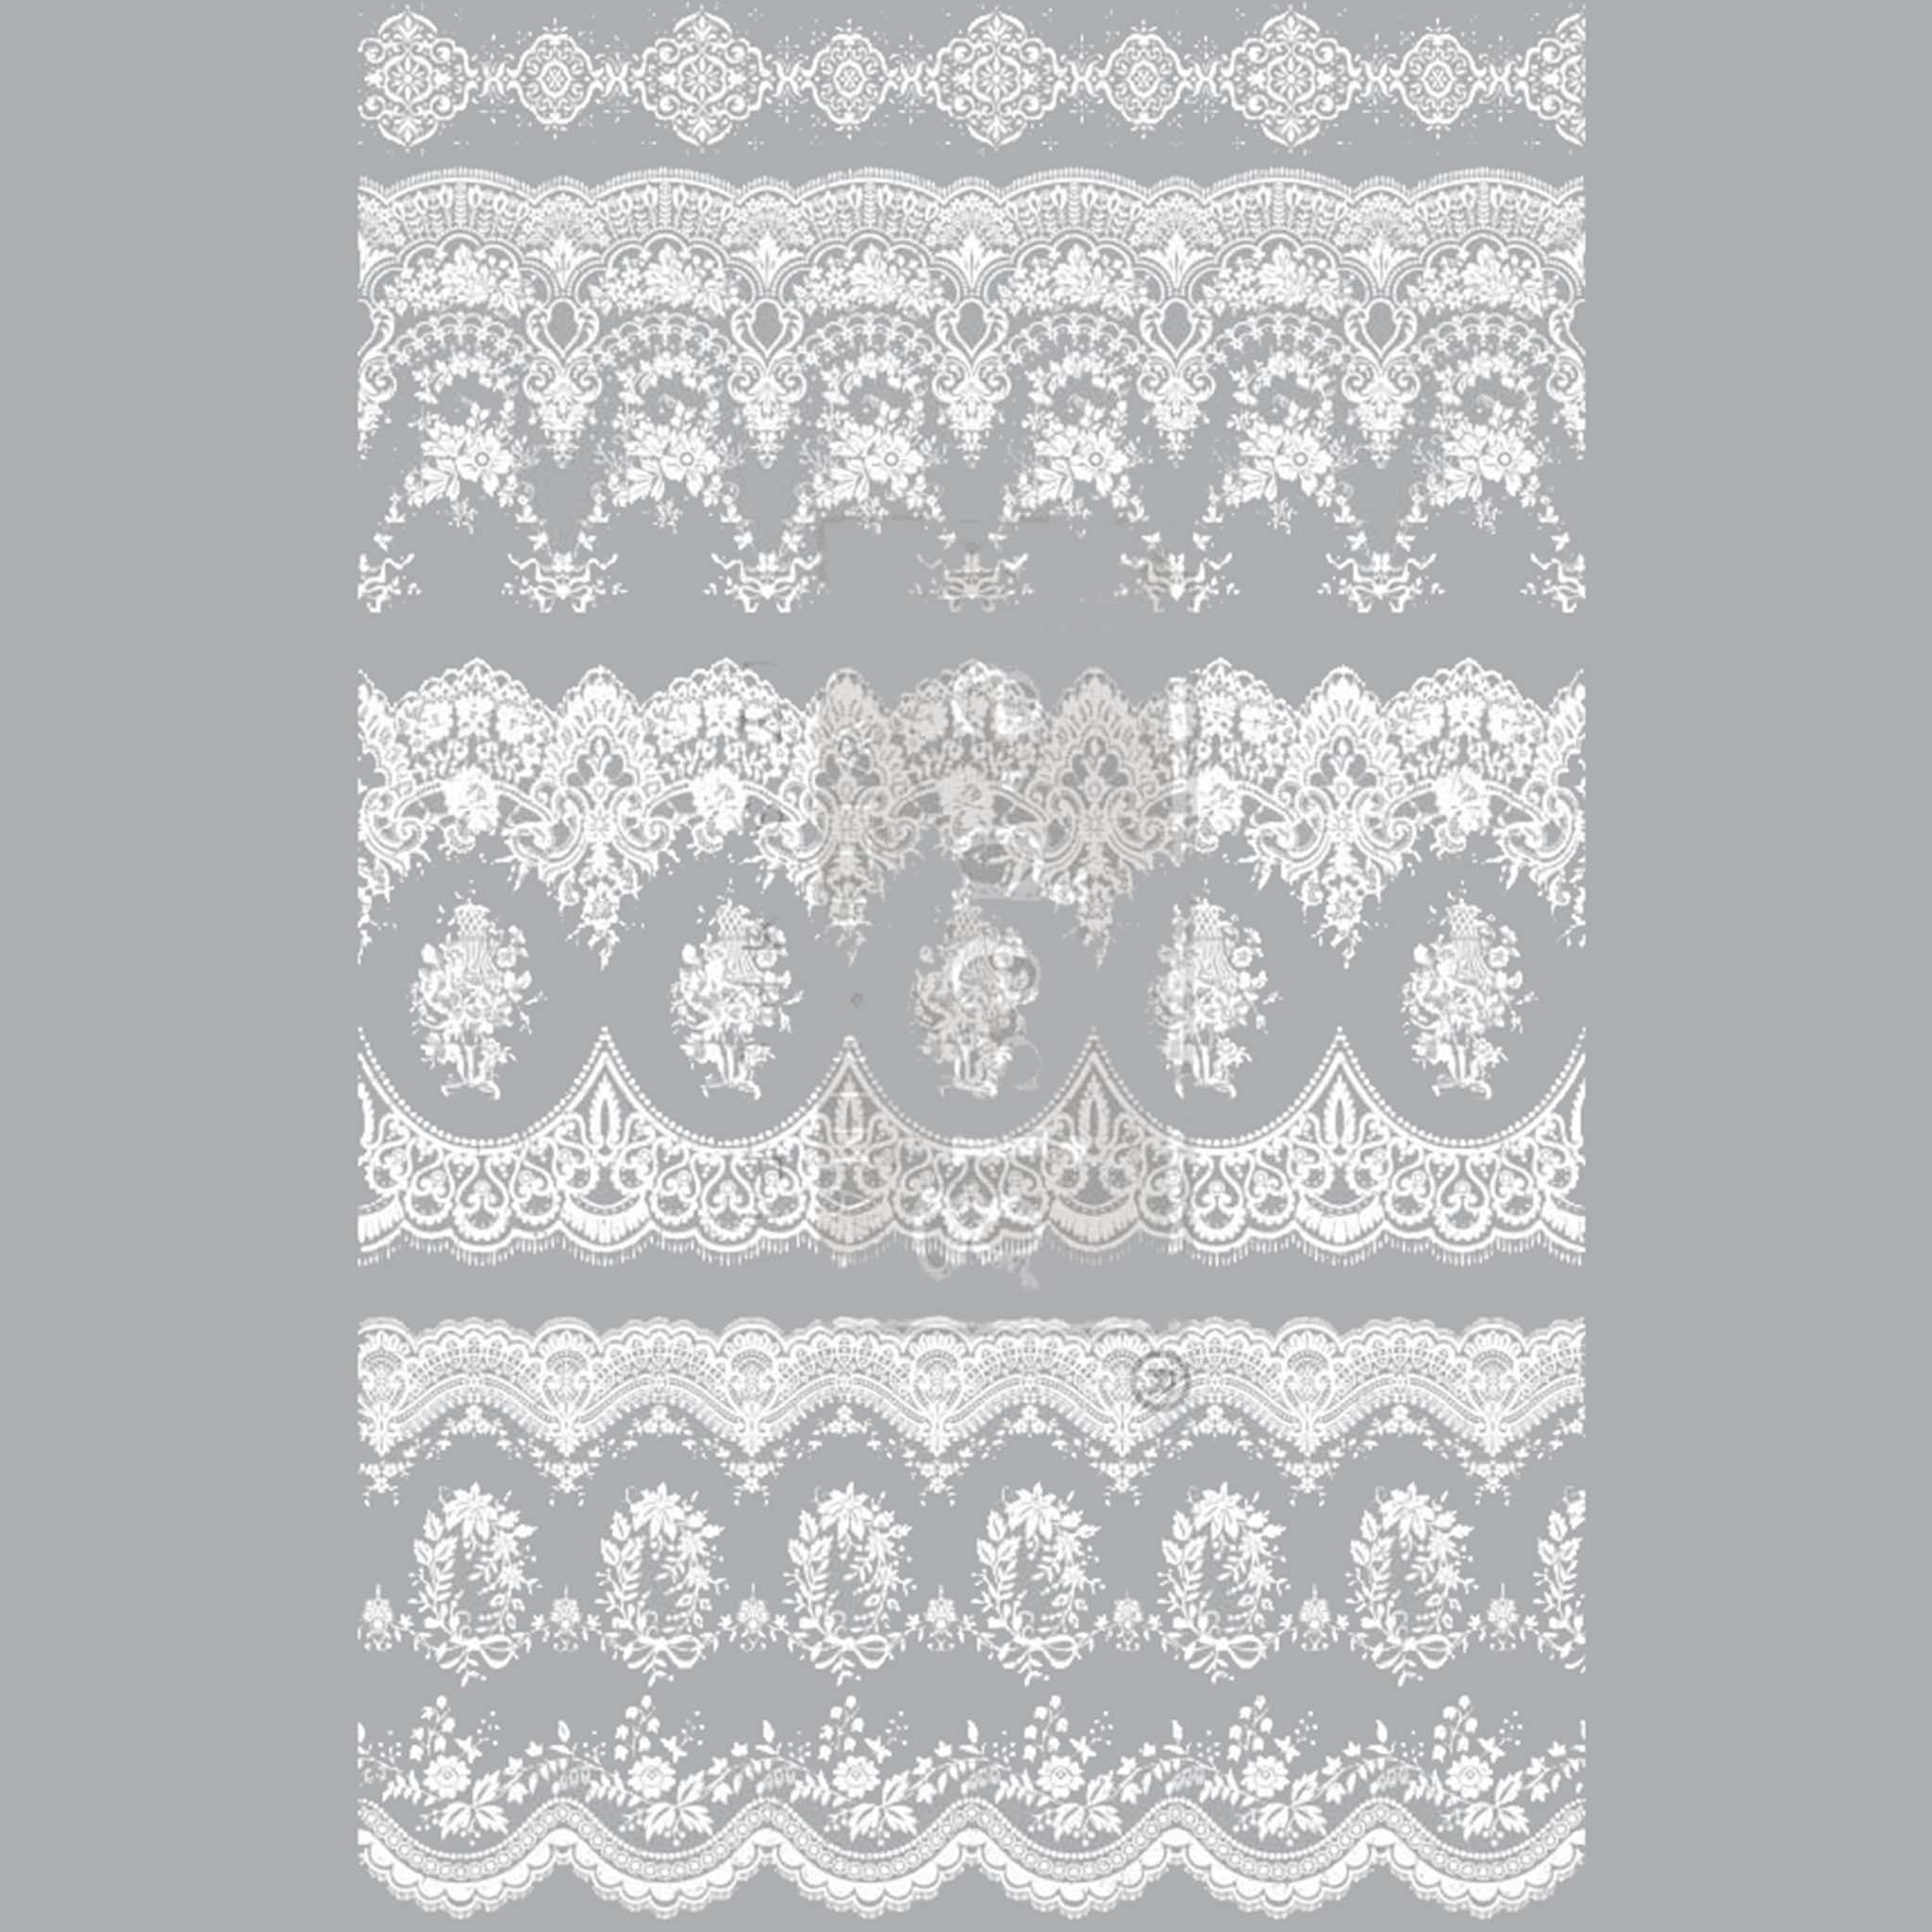 Small rub-on transfer of a white vintage lace wallpaper design on a grey background. Grey borders are on the sides.